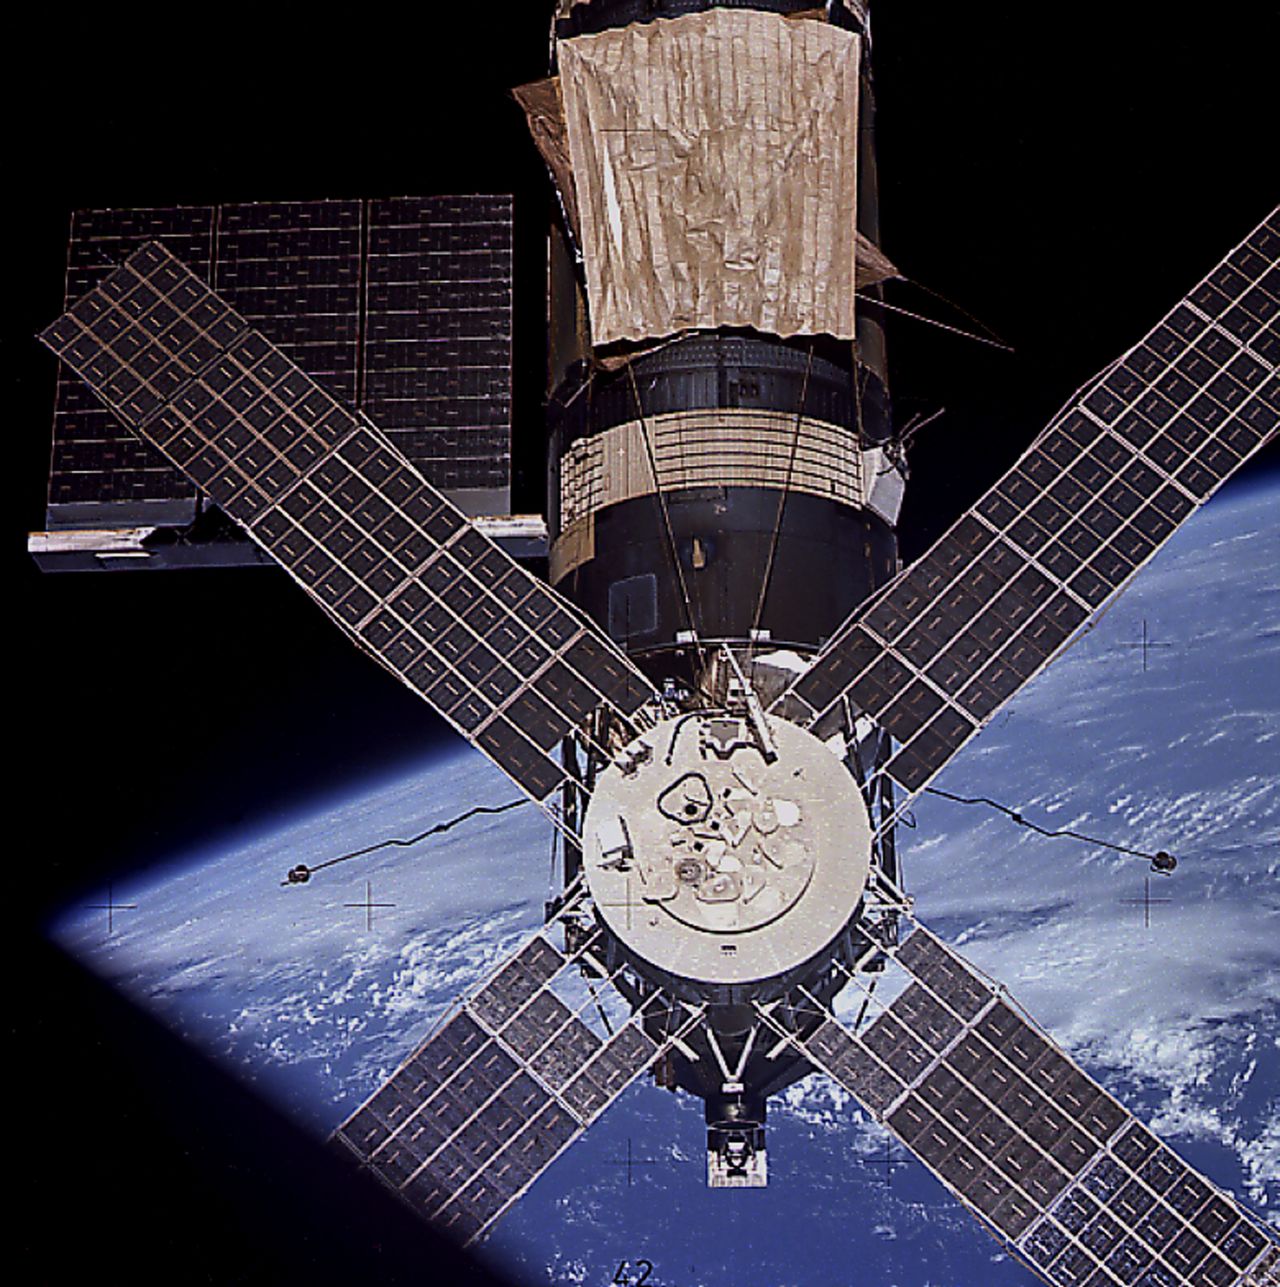 <strong>1973: </strong>Skylab was America's first space station and crewed research laboratory. It was built using the modified stage of a Saturn V rocket, which was fitted with <a href="https://www.nasa.gov/feature/skylab-america-s-first-space-station" target="_blank" target="_blank">living quarters</a> for three astronauts. Skylab launched into space on May 14, and spent six years in orbit, home to three successive crews. The longest stay for any crew on the station was <a href="https://www.nasa.gov/mission_pages/skylab/missions/skylab_summary.html" target="_blank" target="_blank">84 days</a>. 